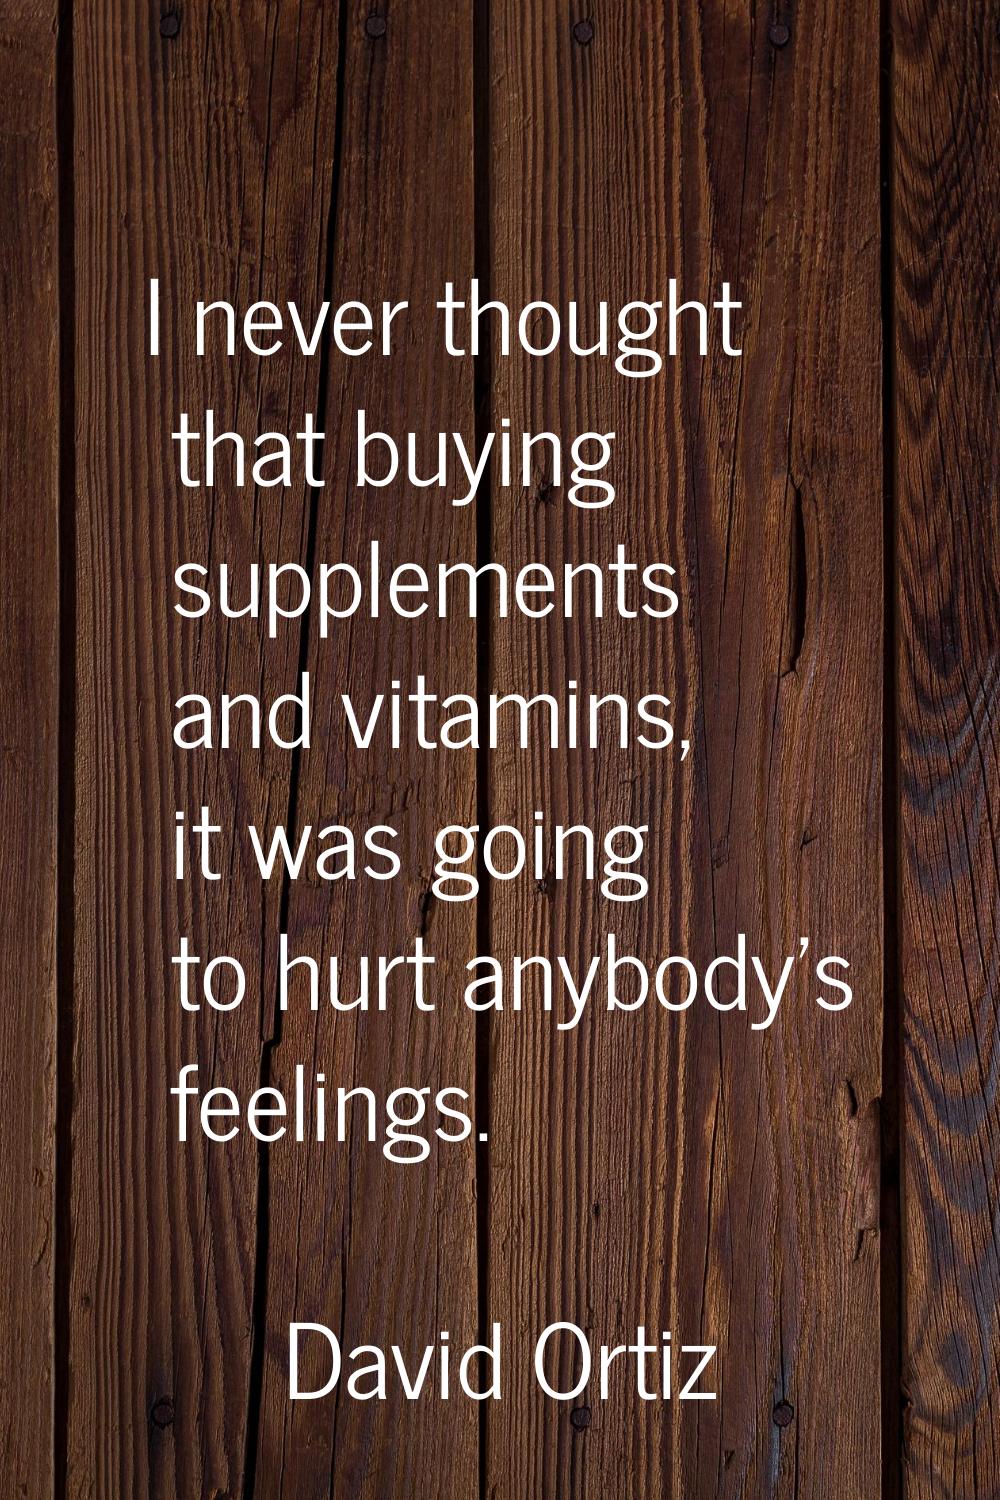 I never thought that buying supplements and vitamins, it was going to hurt anybody's feelings.